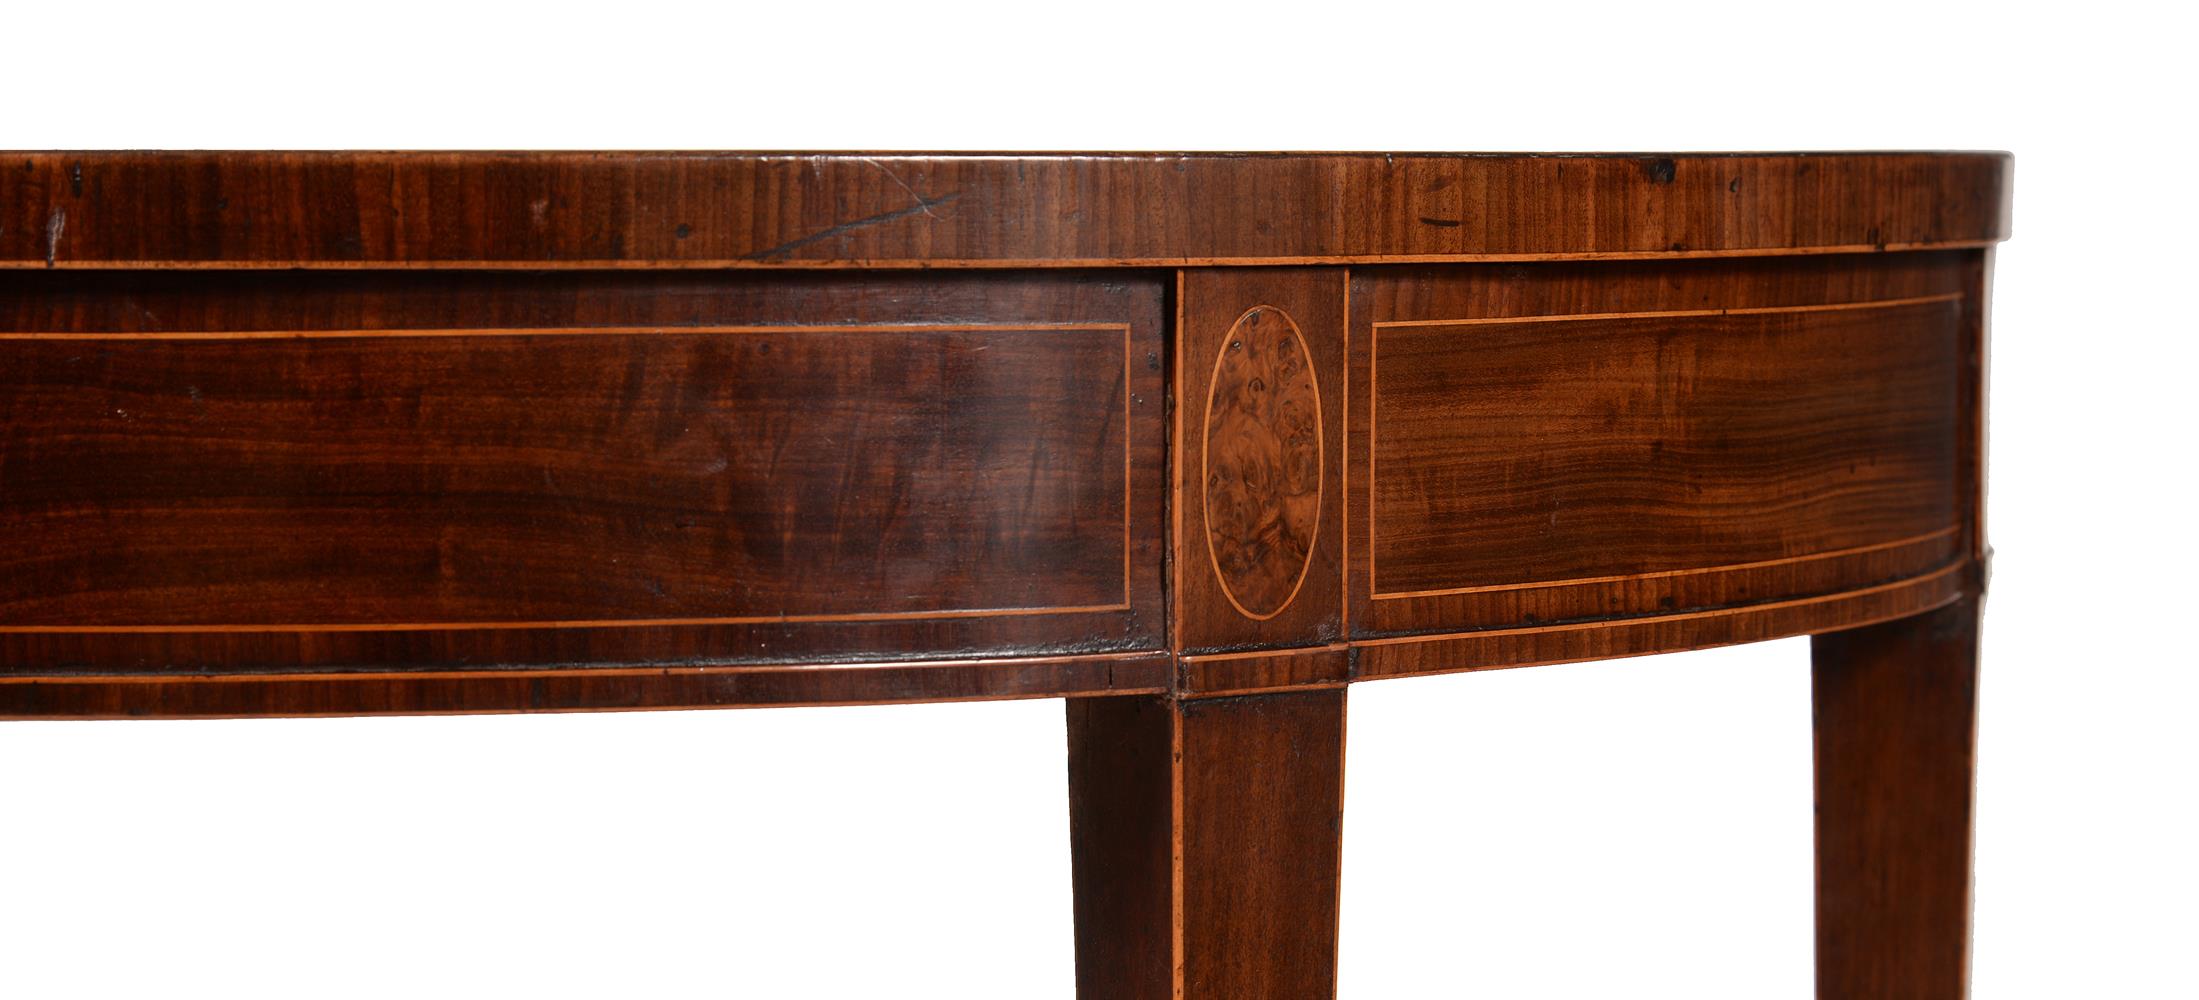 A GEORGE III MAHOGANY AND INLAID SIDE TABLE - Image 2 of 2